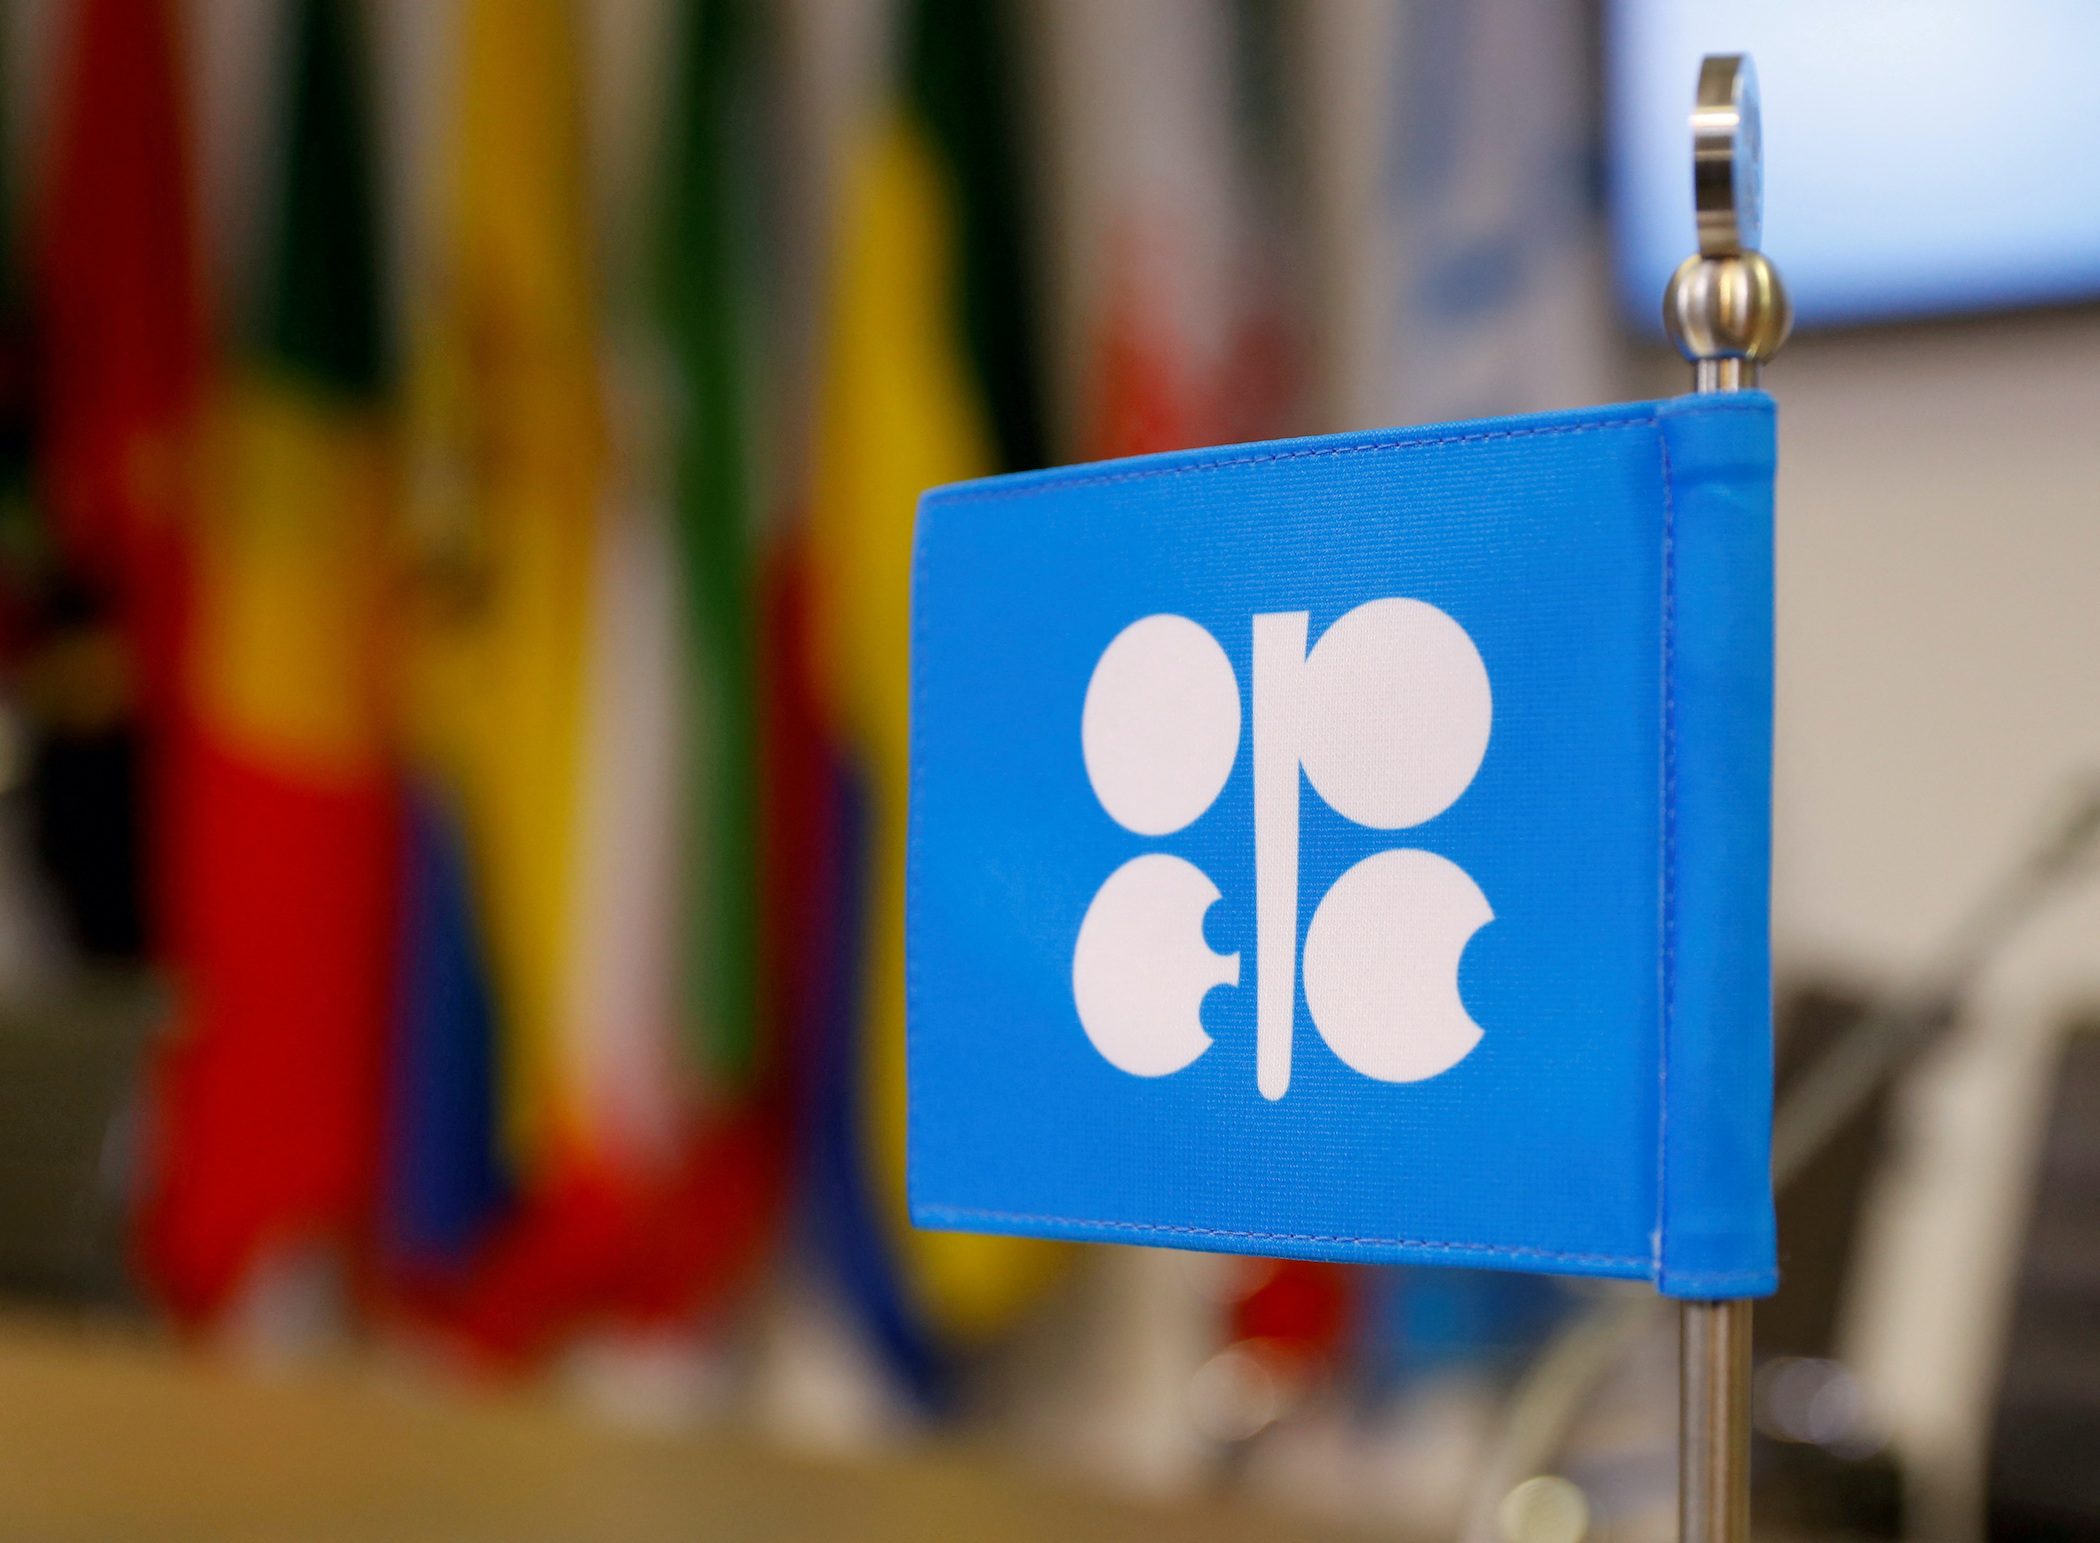 EXPLAINER: Why is OPEC cutting oil output?